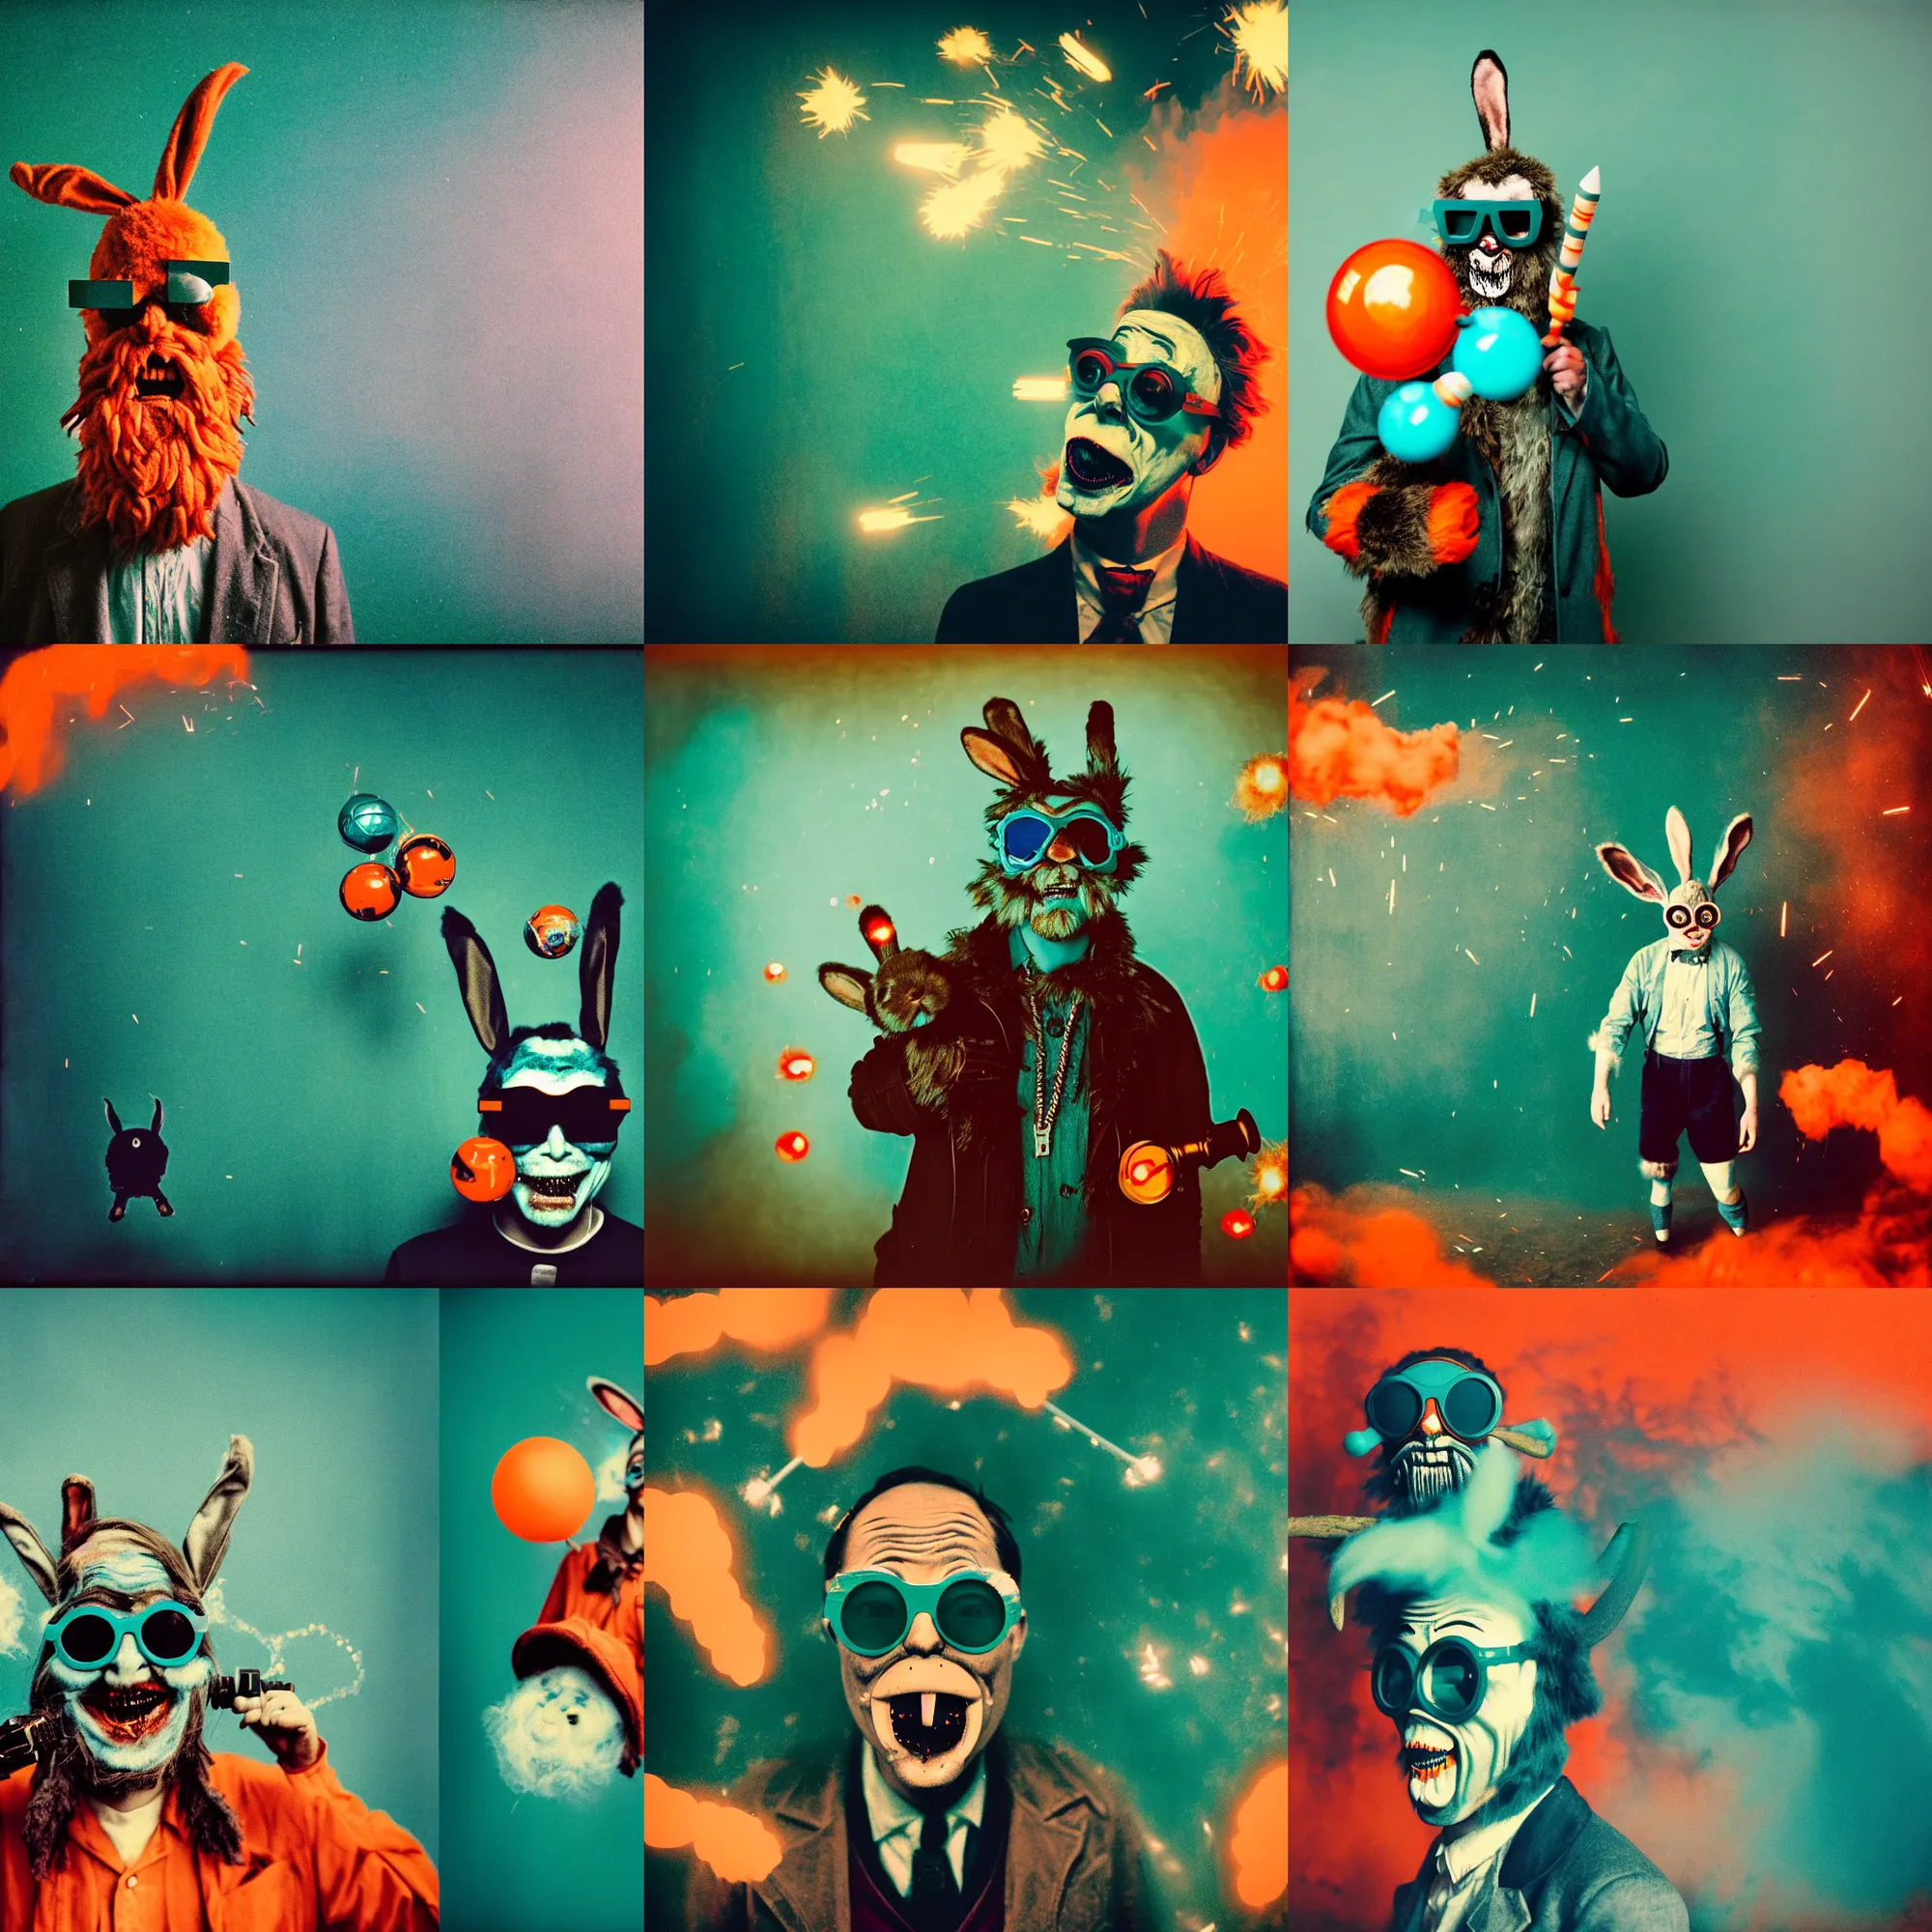 Prompt: kodak portra 4 0 0, wetplate, teal and orange colours, explosions, rockets, funny sunglasses, krampus, bunny head, the walking dead, 1 9 2 0 s style, motion blur, portrait photo of a backdrop, bombs, sparkling, fog, by georges melies and by britt marling